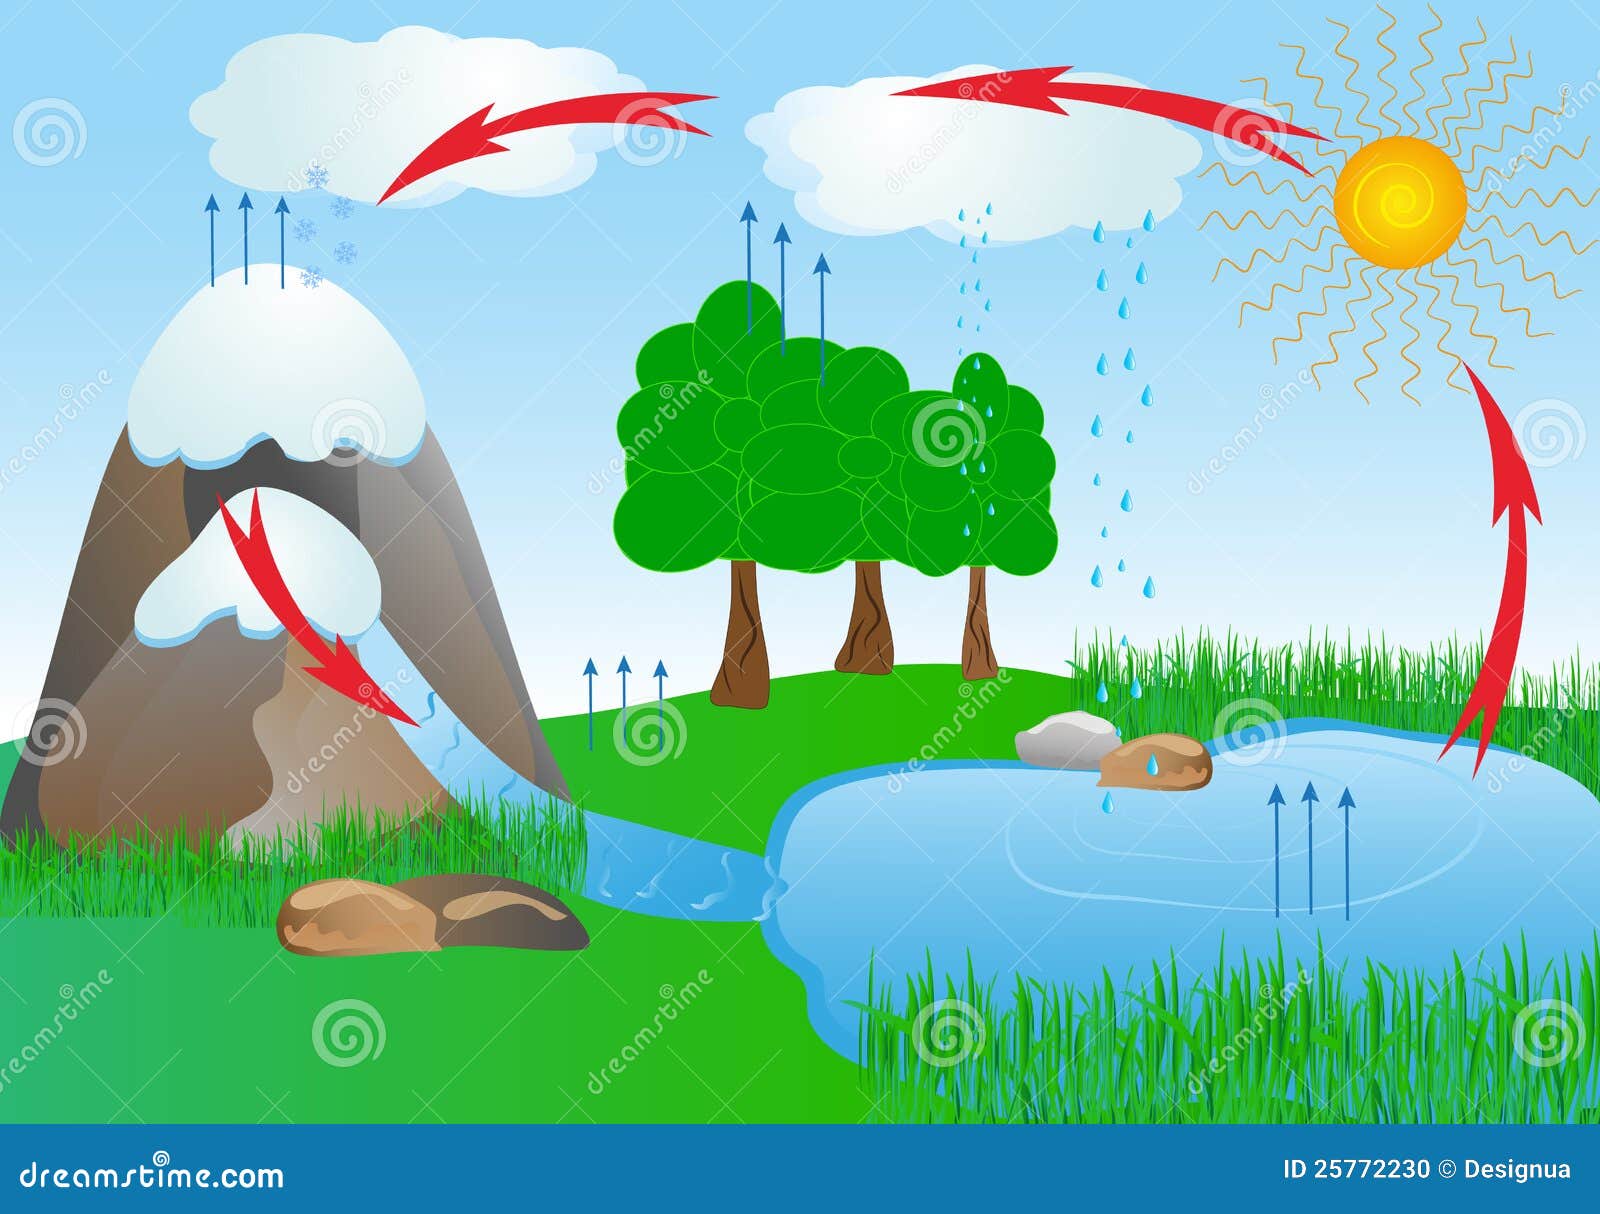 water cycle clip art - photo #36